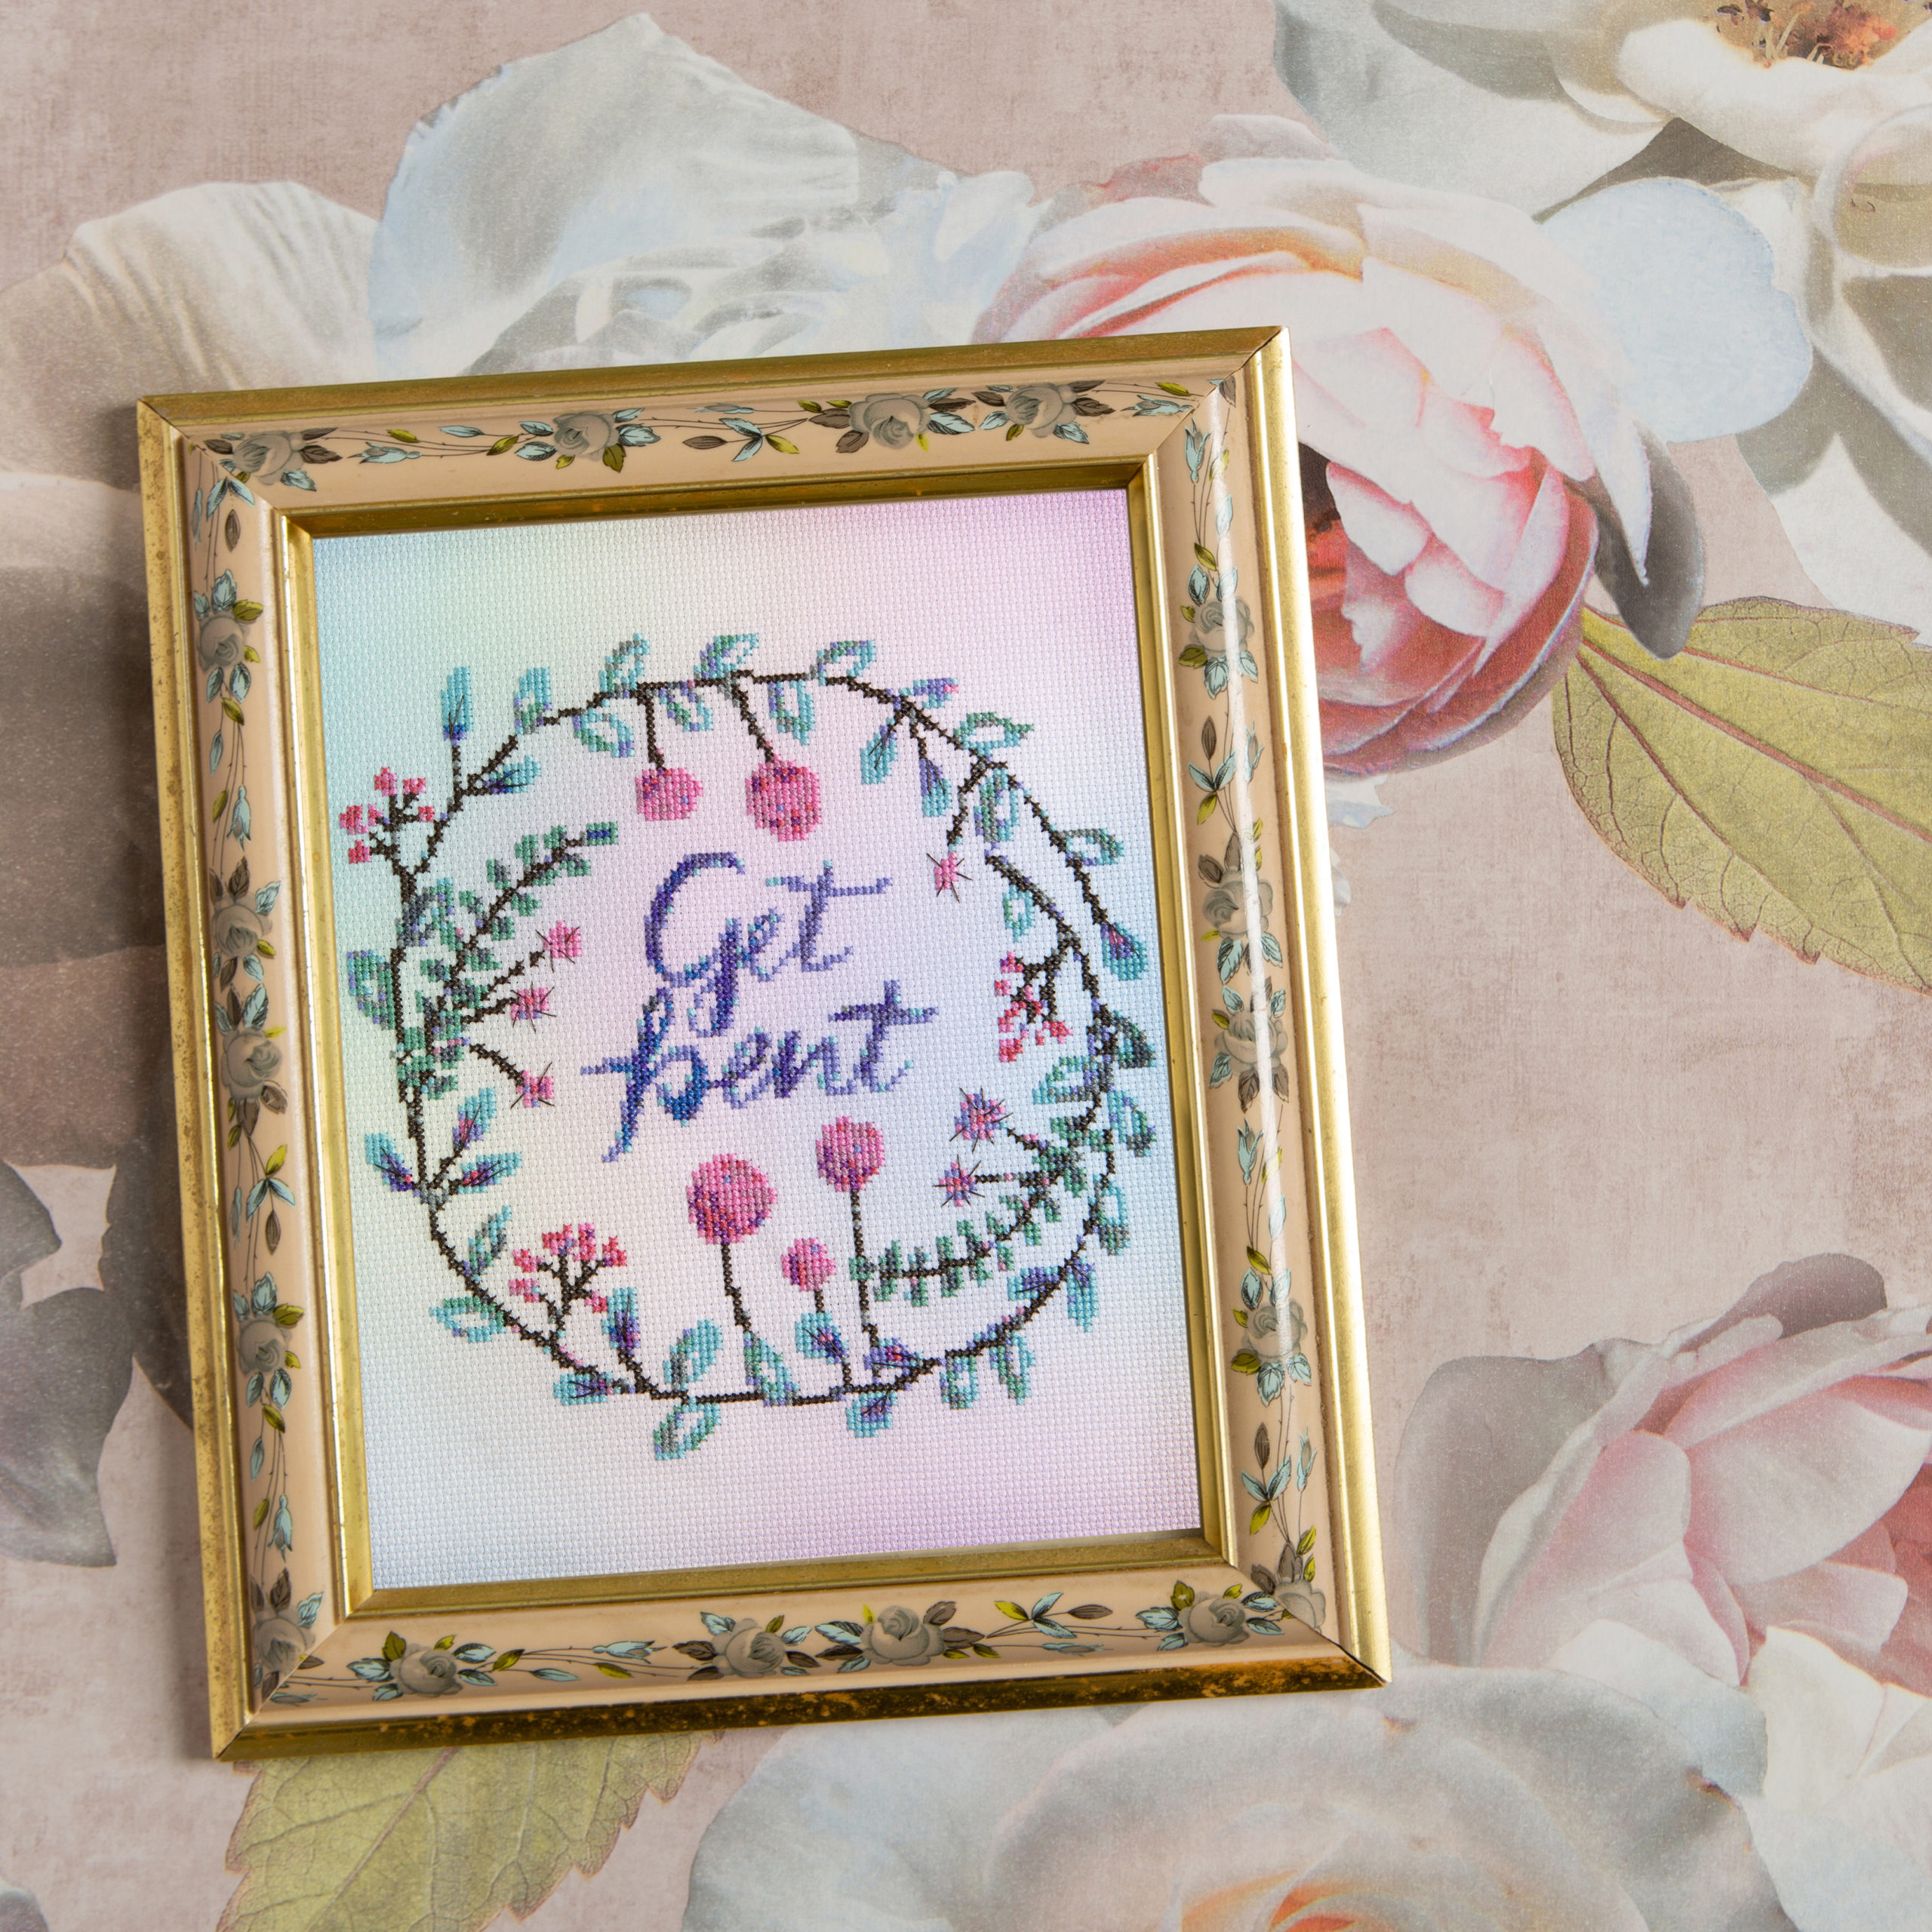 How to frame cross stitch and embroidery - Peacock & Fig